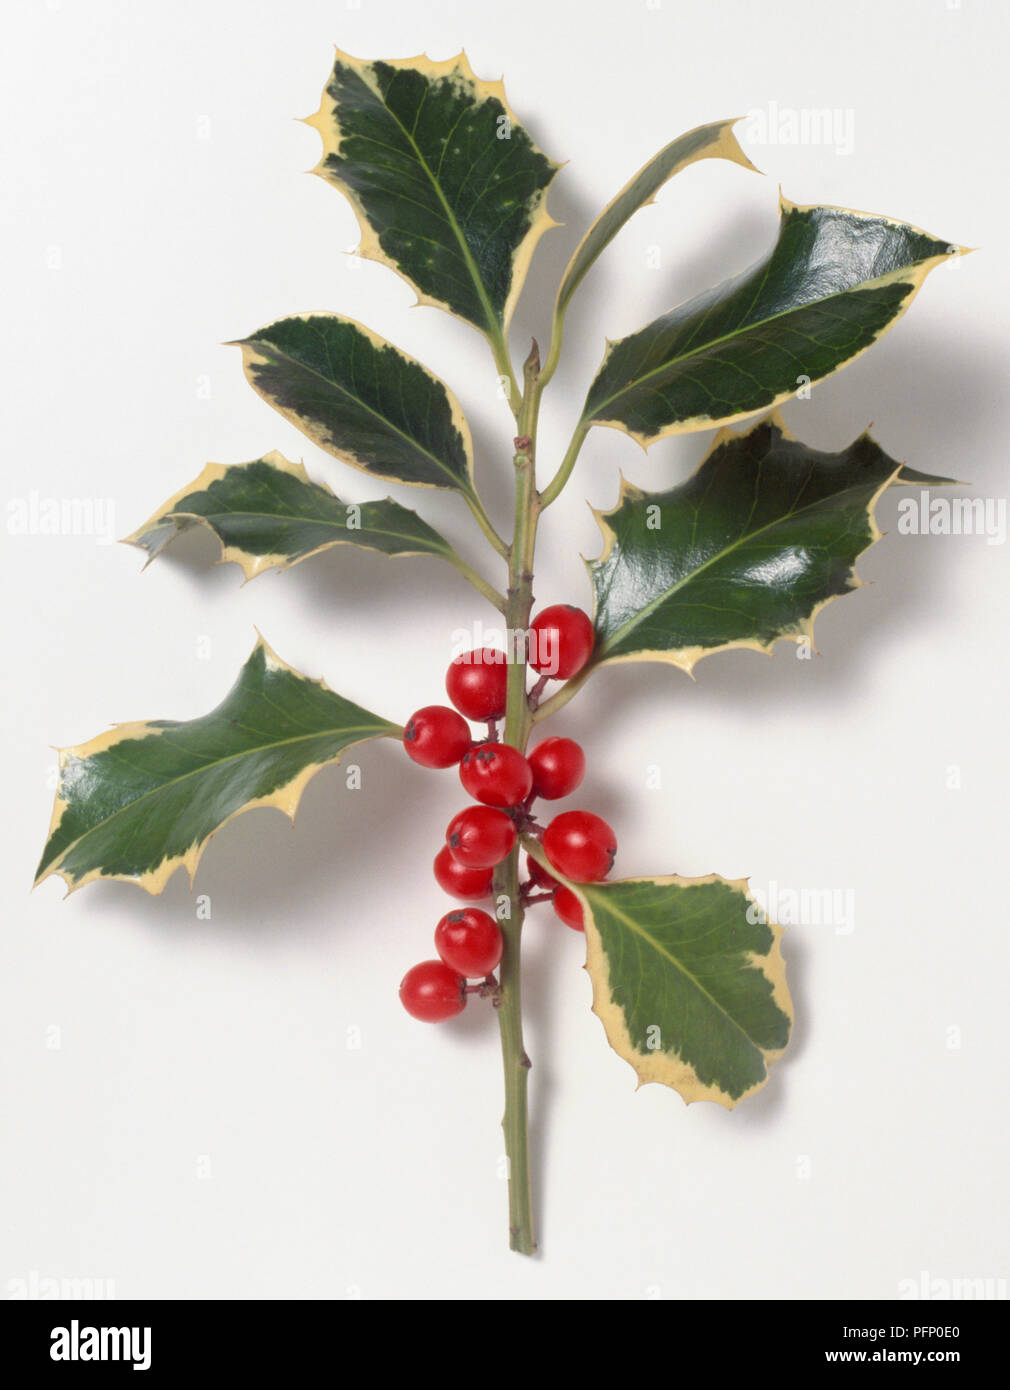 Aquifoliaceae, Ilex aquifolium 'Argentea Marginata', Common Holly, stem with young, pink, spiny leaves, green shoots and red berries. Stock Photo